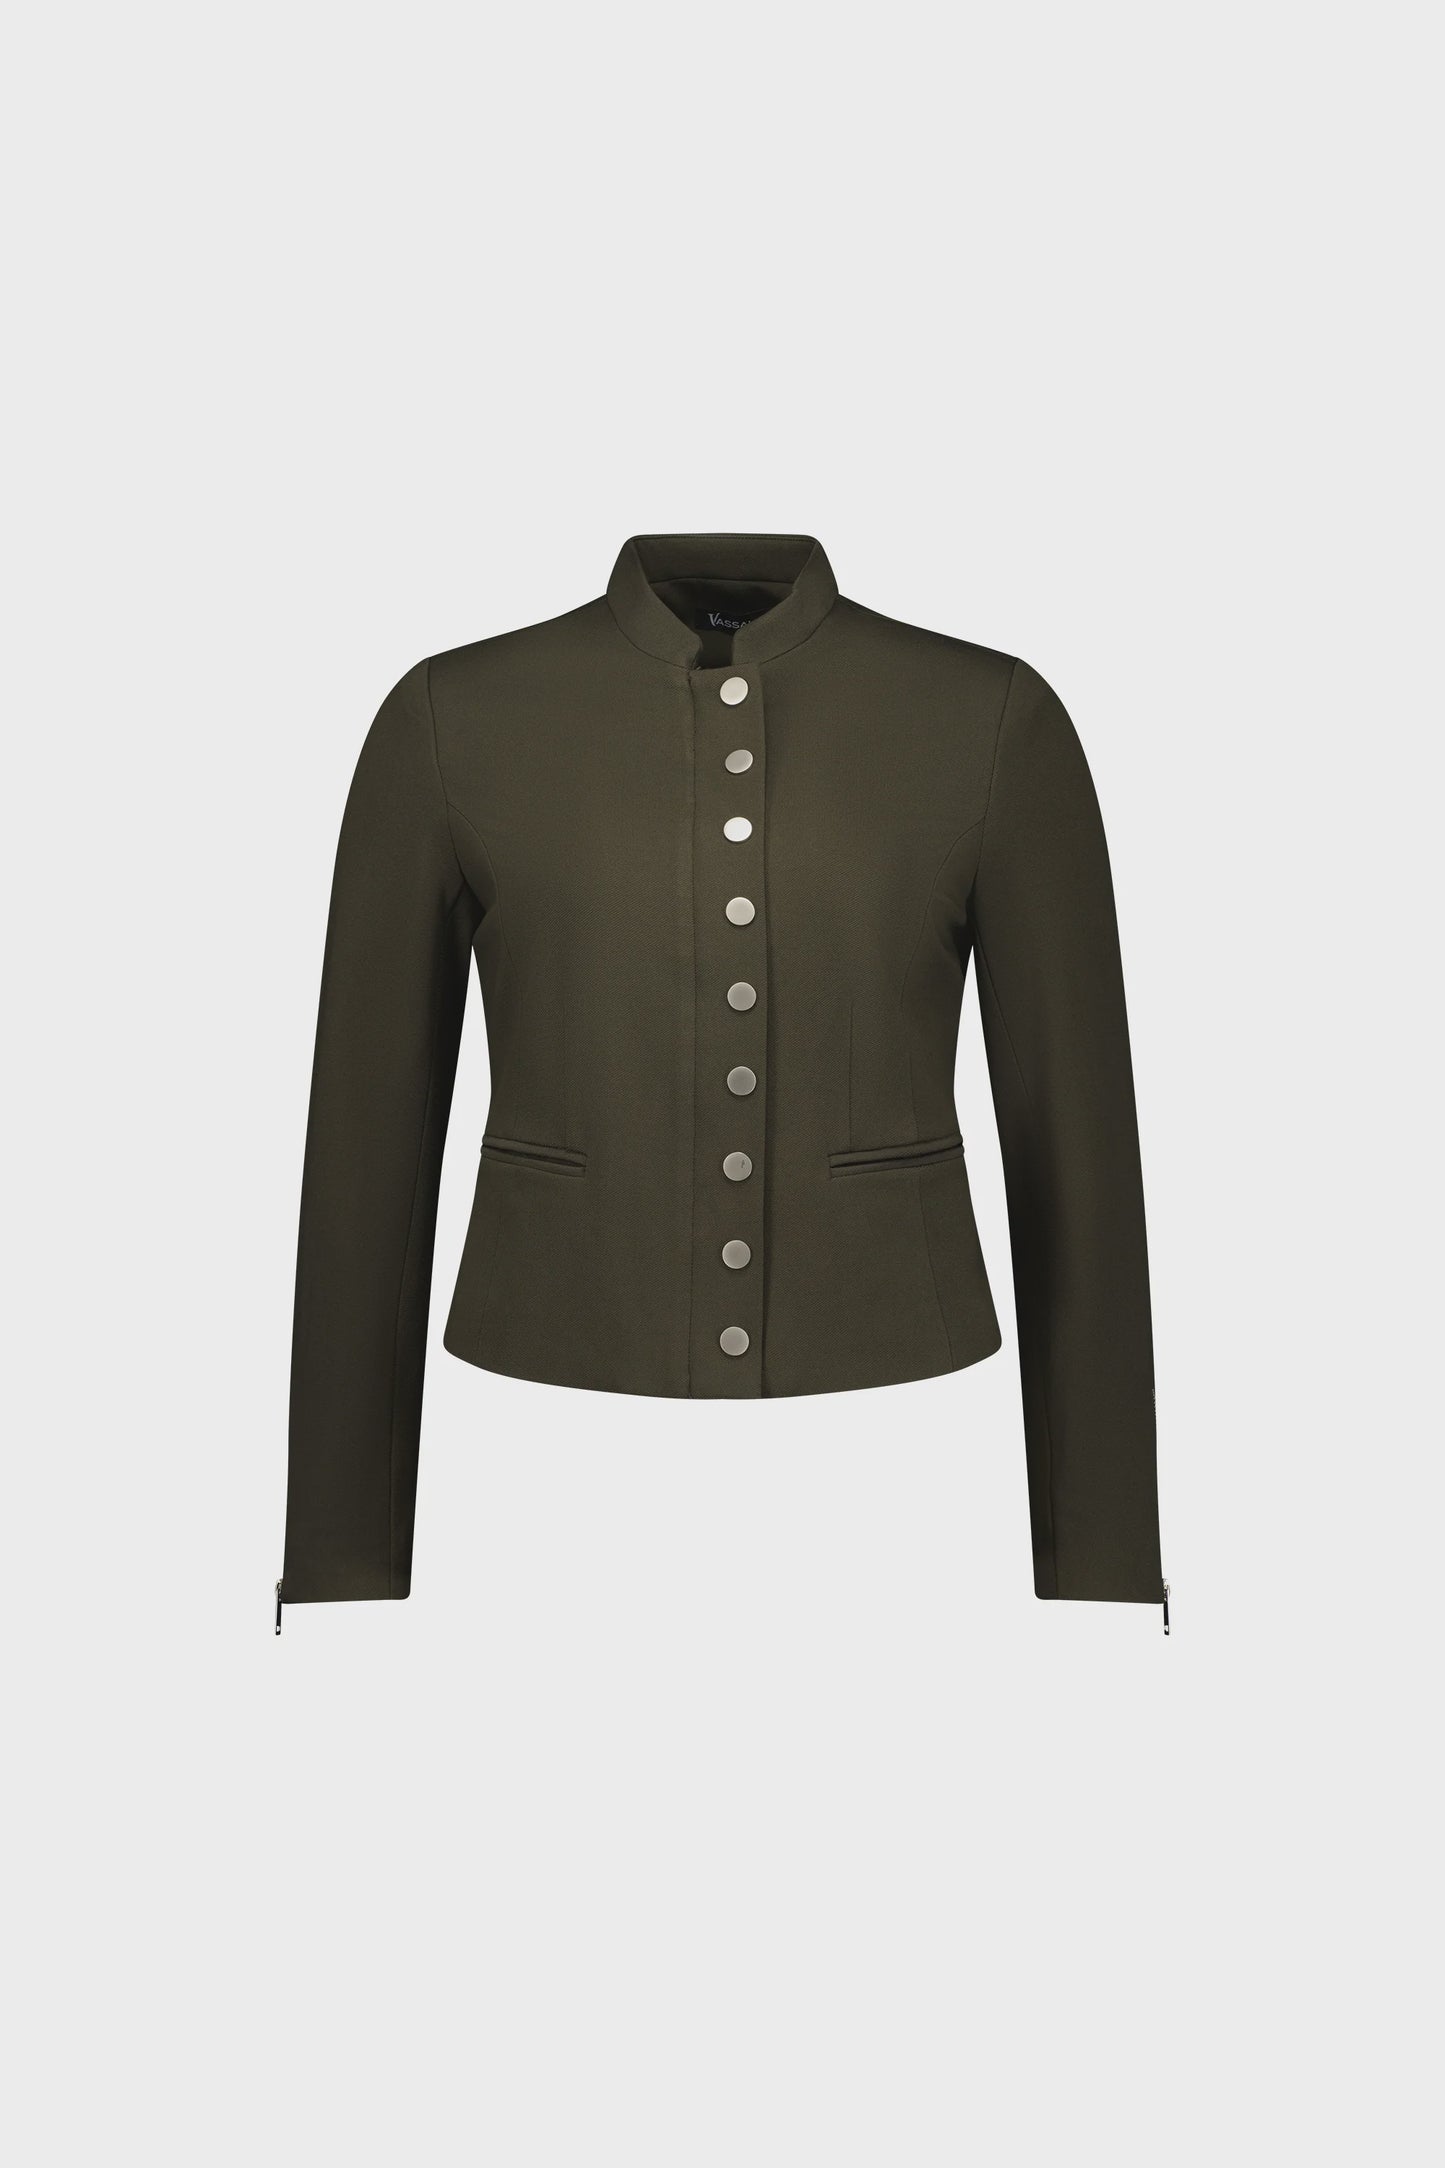 Vassalli- Zip Up Military Style Lined Jacket with Button Detail